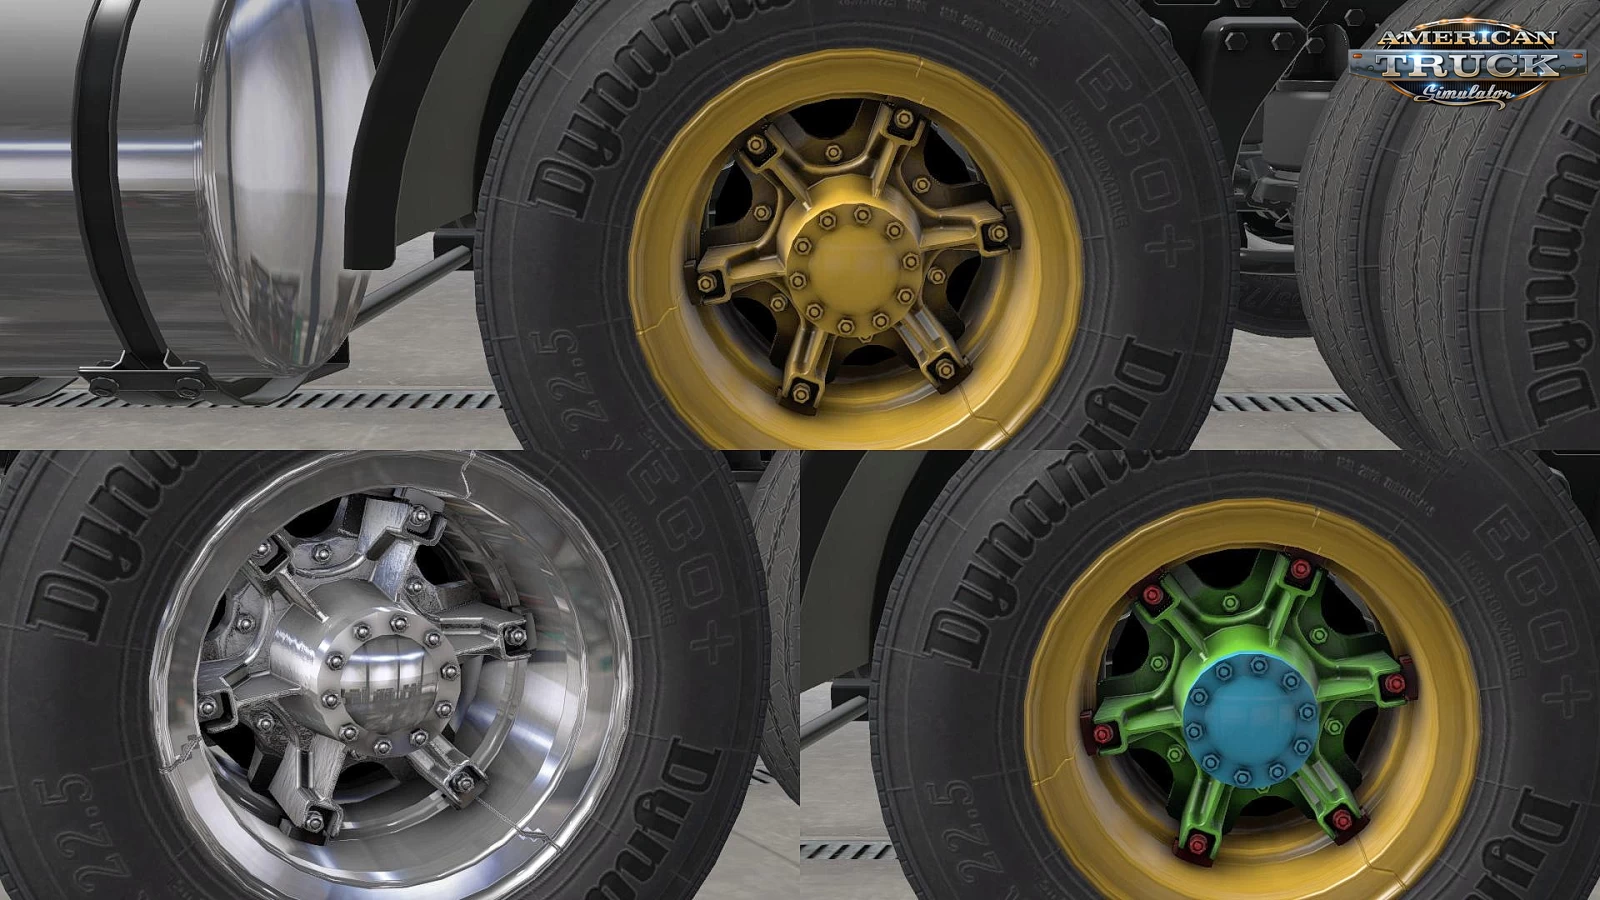 Trilex Rims v1.3 by Overfloater (1.45.x) for ATS